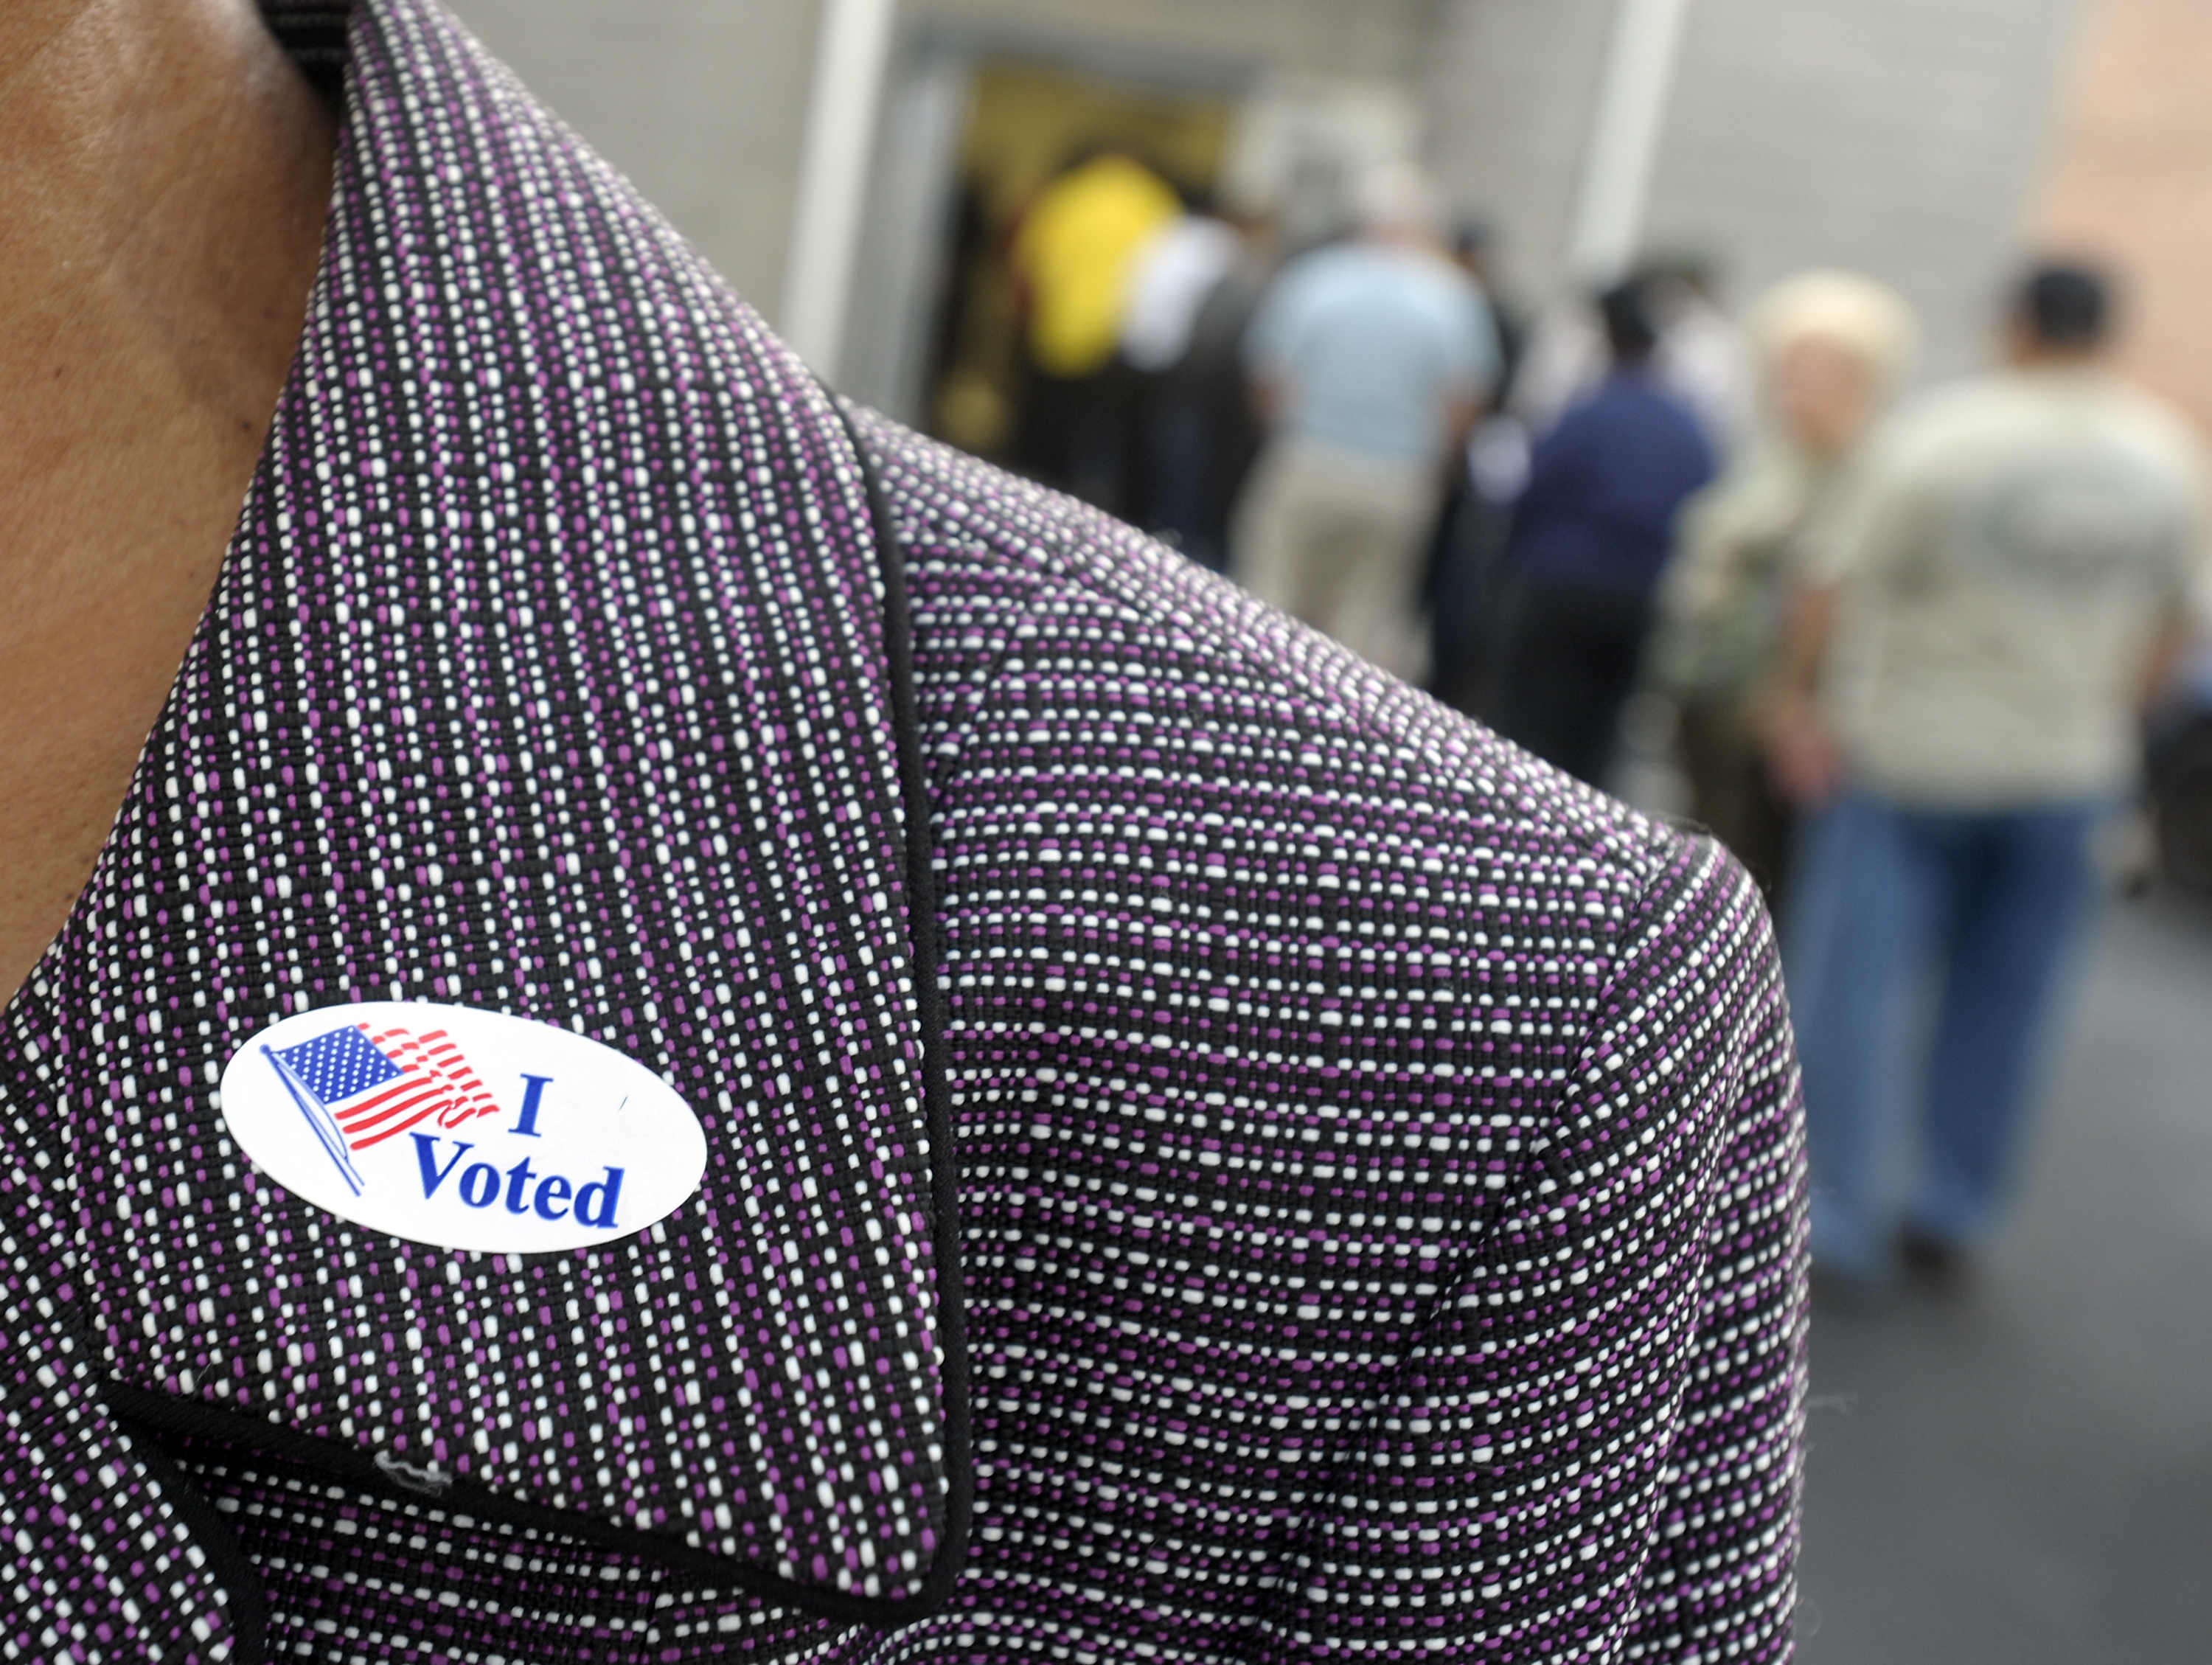 A voter displays their "I Voted" sticker on their lapel after voting as others wait in line for the first day of Early Voting on October 18, 2012 in Wilson, North Carolina. 